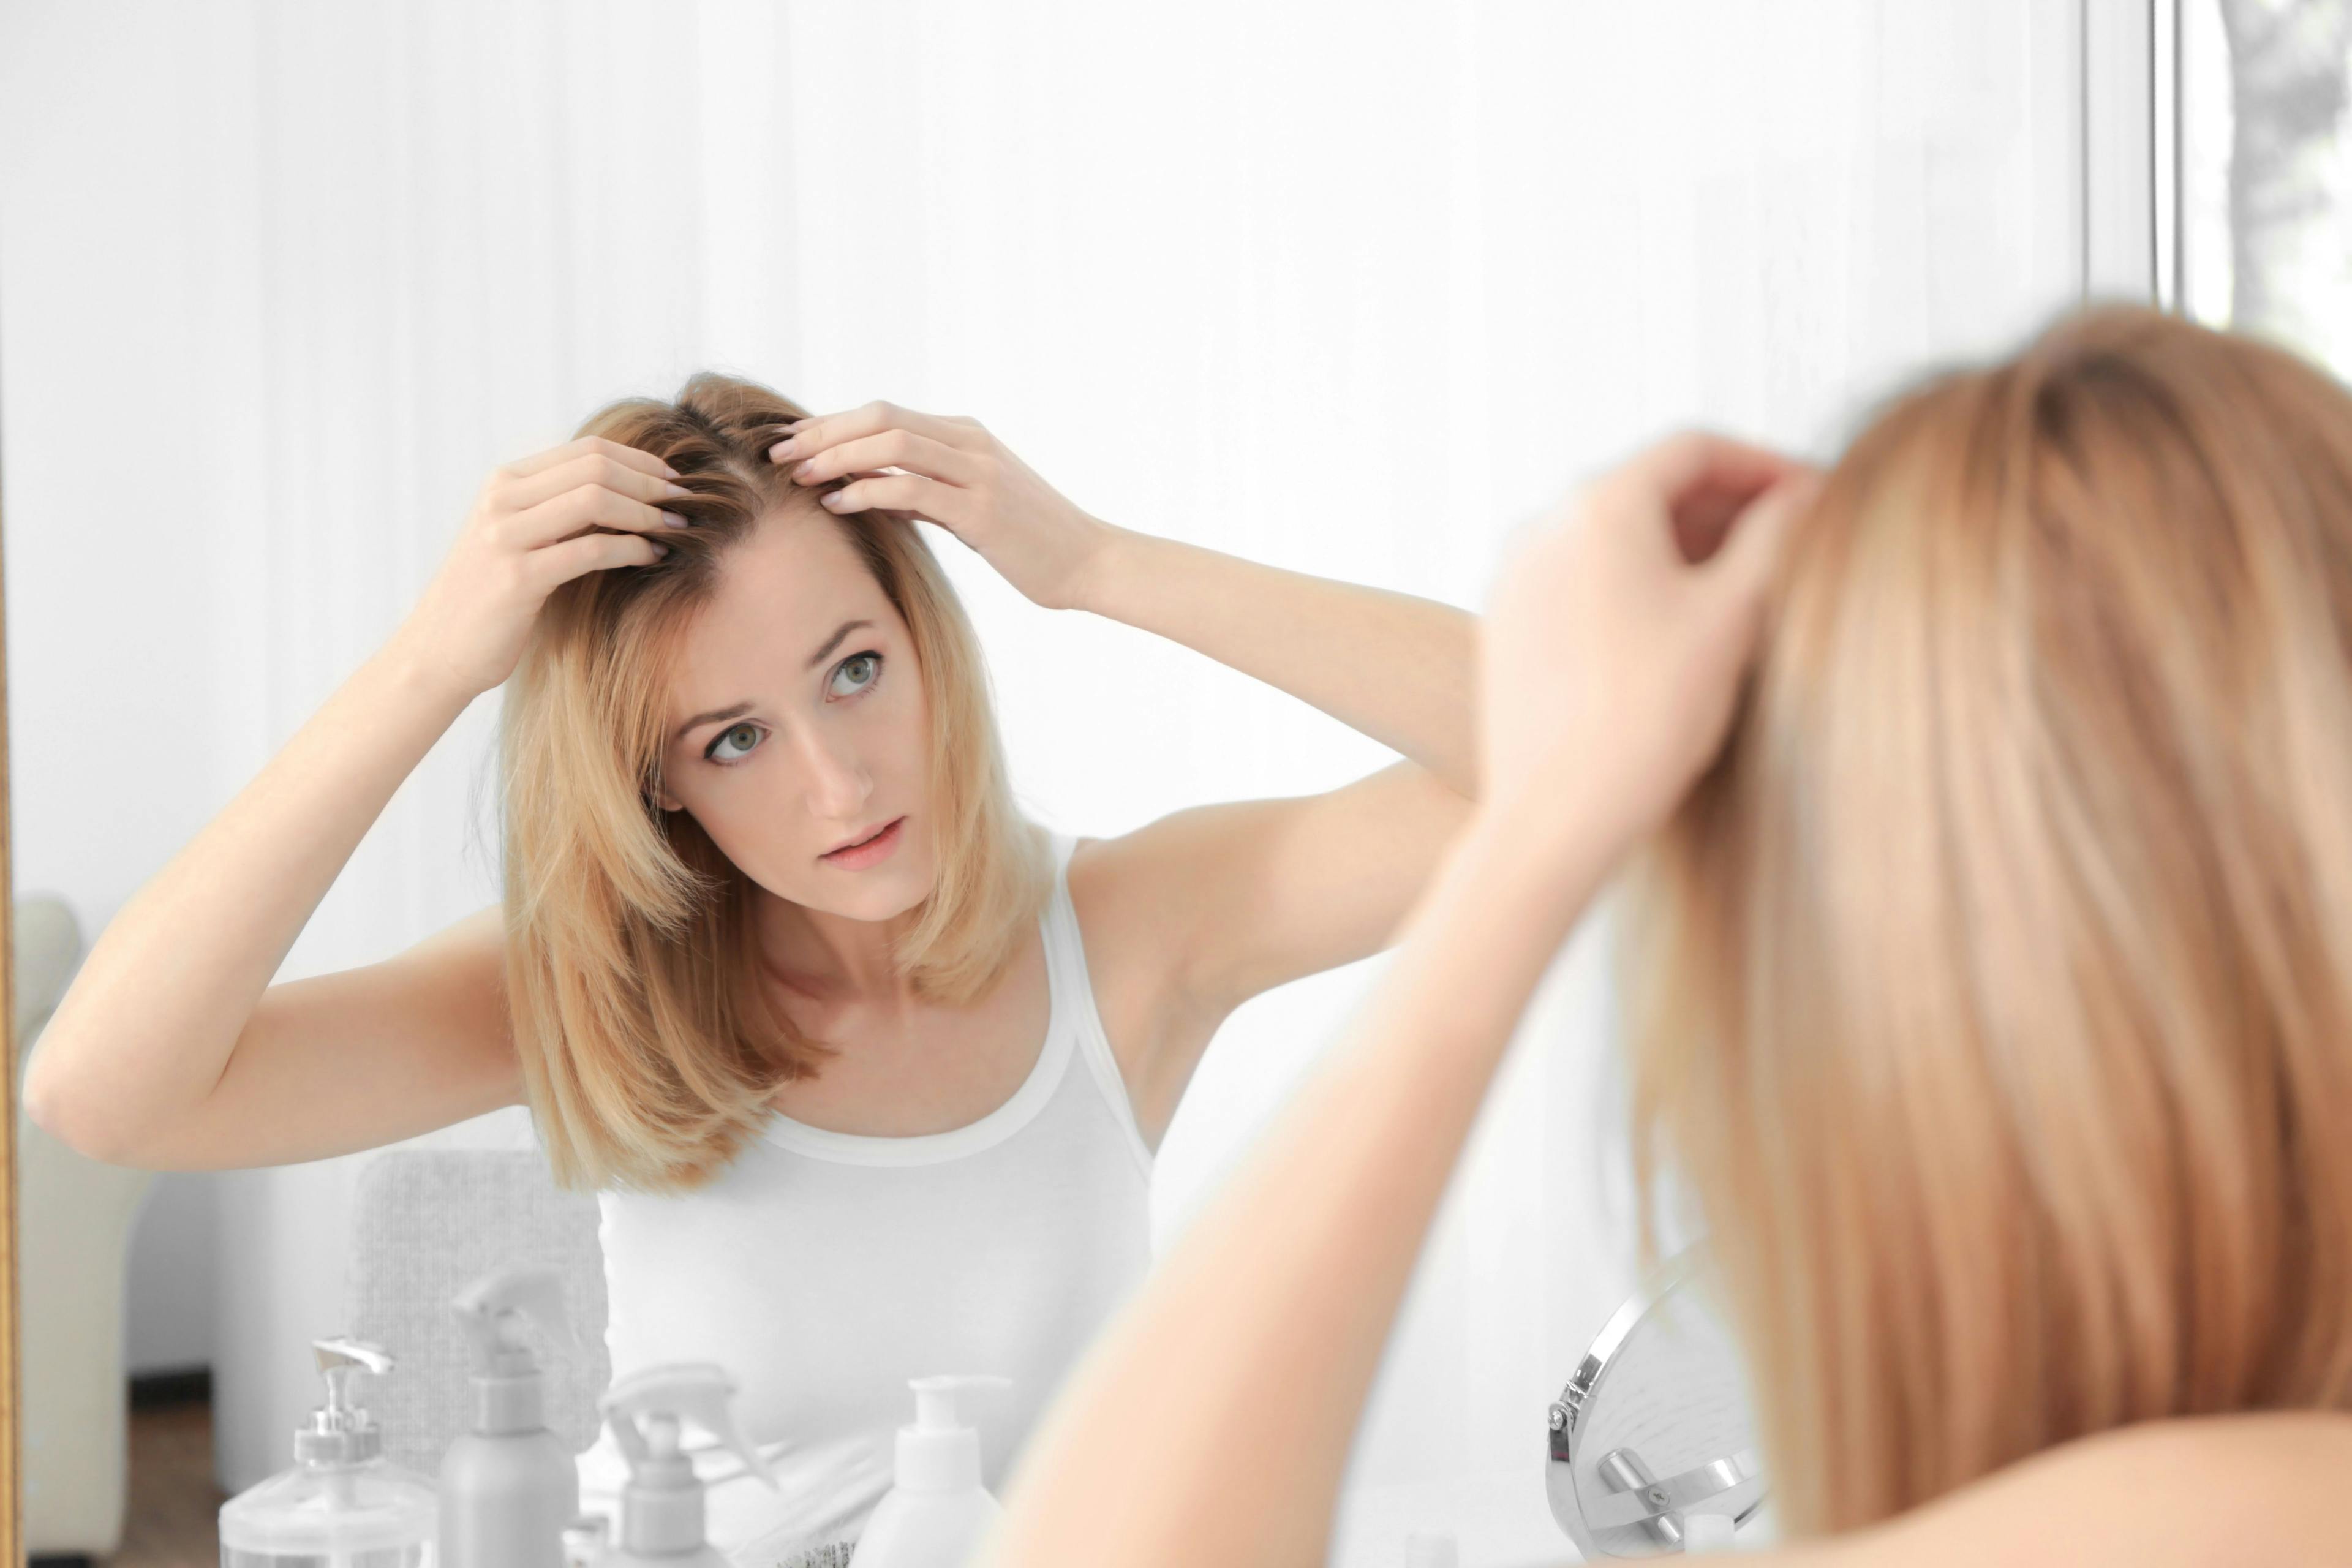 Clinical study shows positive results of nutraceutical supplement to promote hair growth